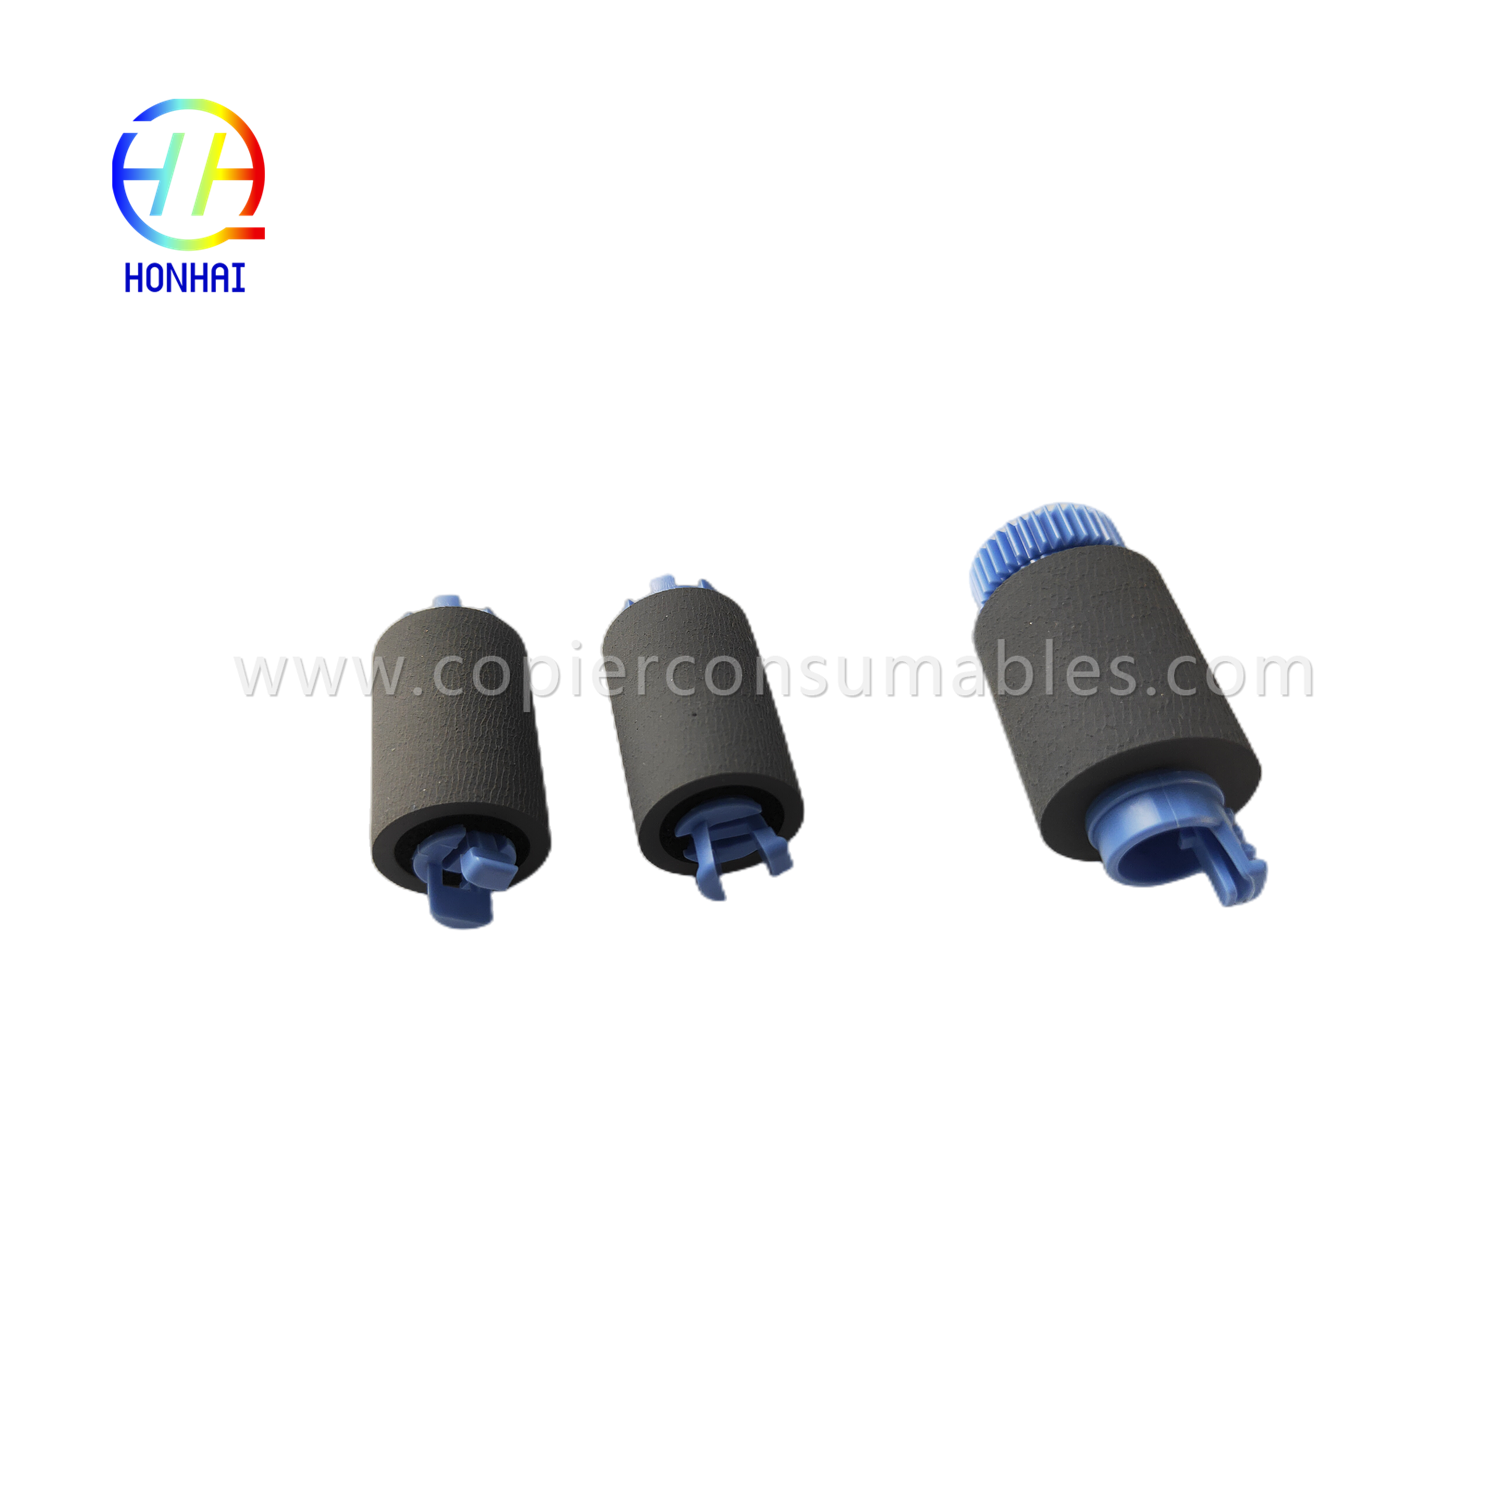 https://www.copierconsumables.com/tray-2-5-pickup-feed-separation-roller-set-for-hp-a7w93-67082-mfp-785f-780dn-e77650z-e77660z-e77650dn-70dn-70 p77750z-p77760z-p75050dn-p75050dw-product/